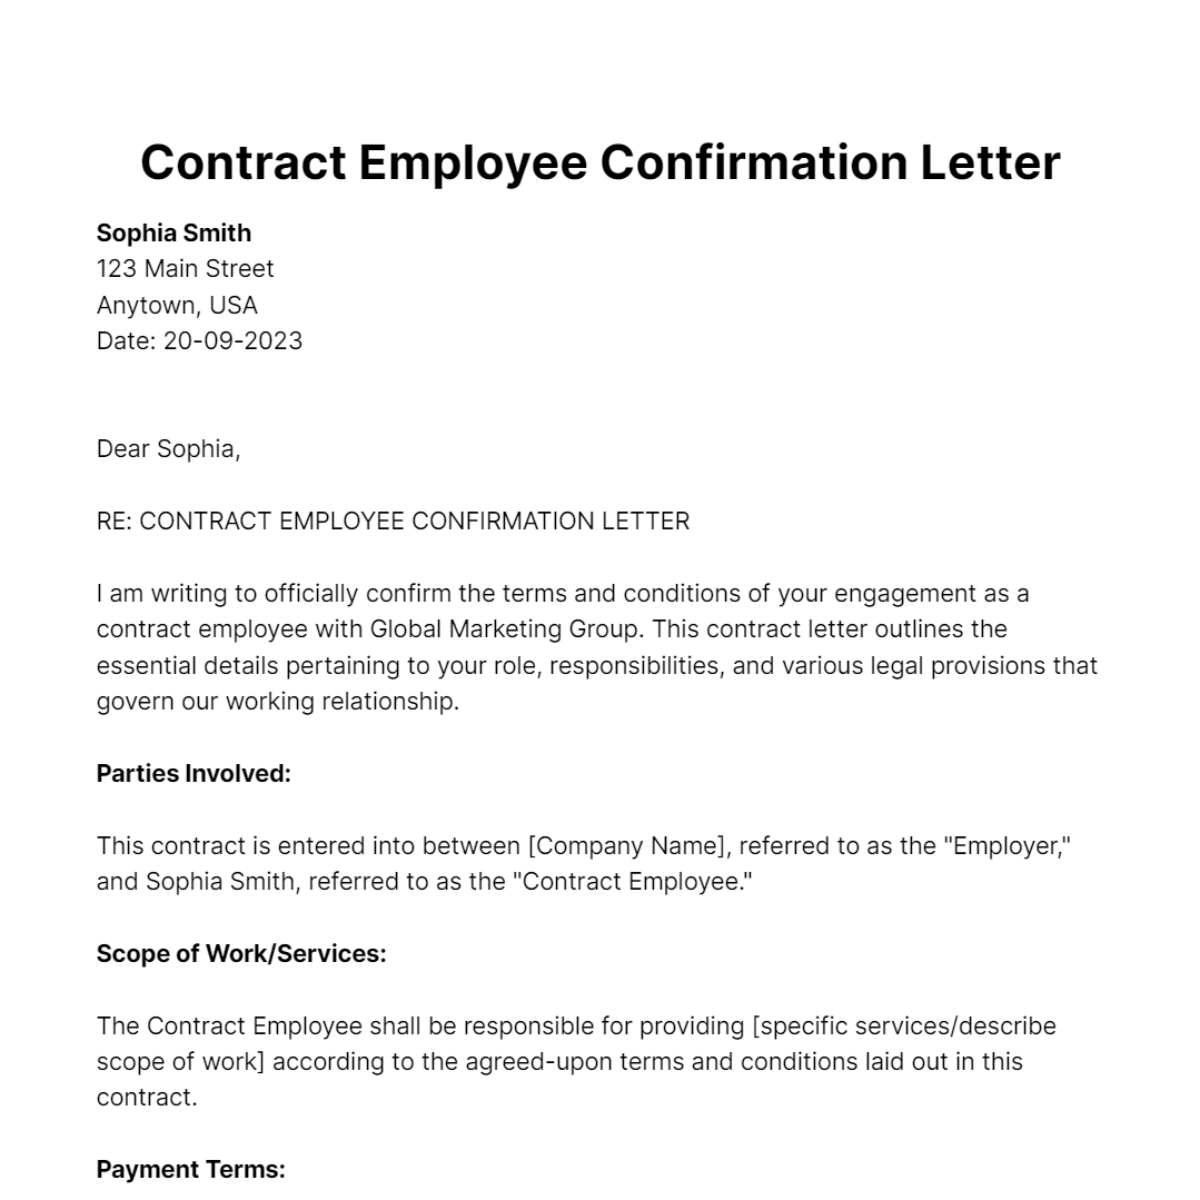 Contract Employee Confirmation Letter Template